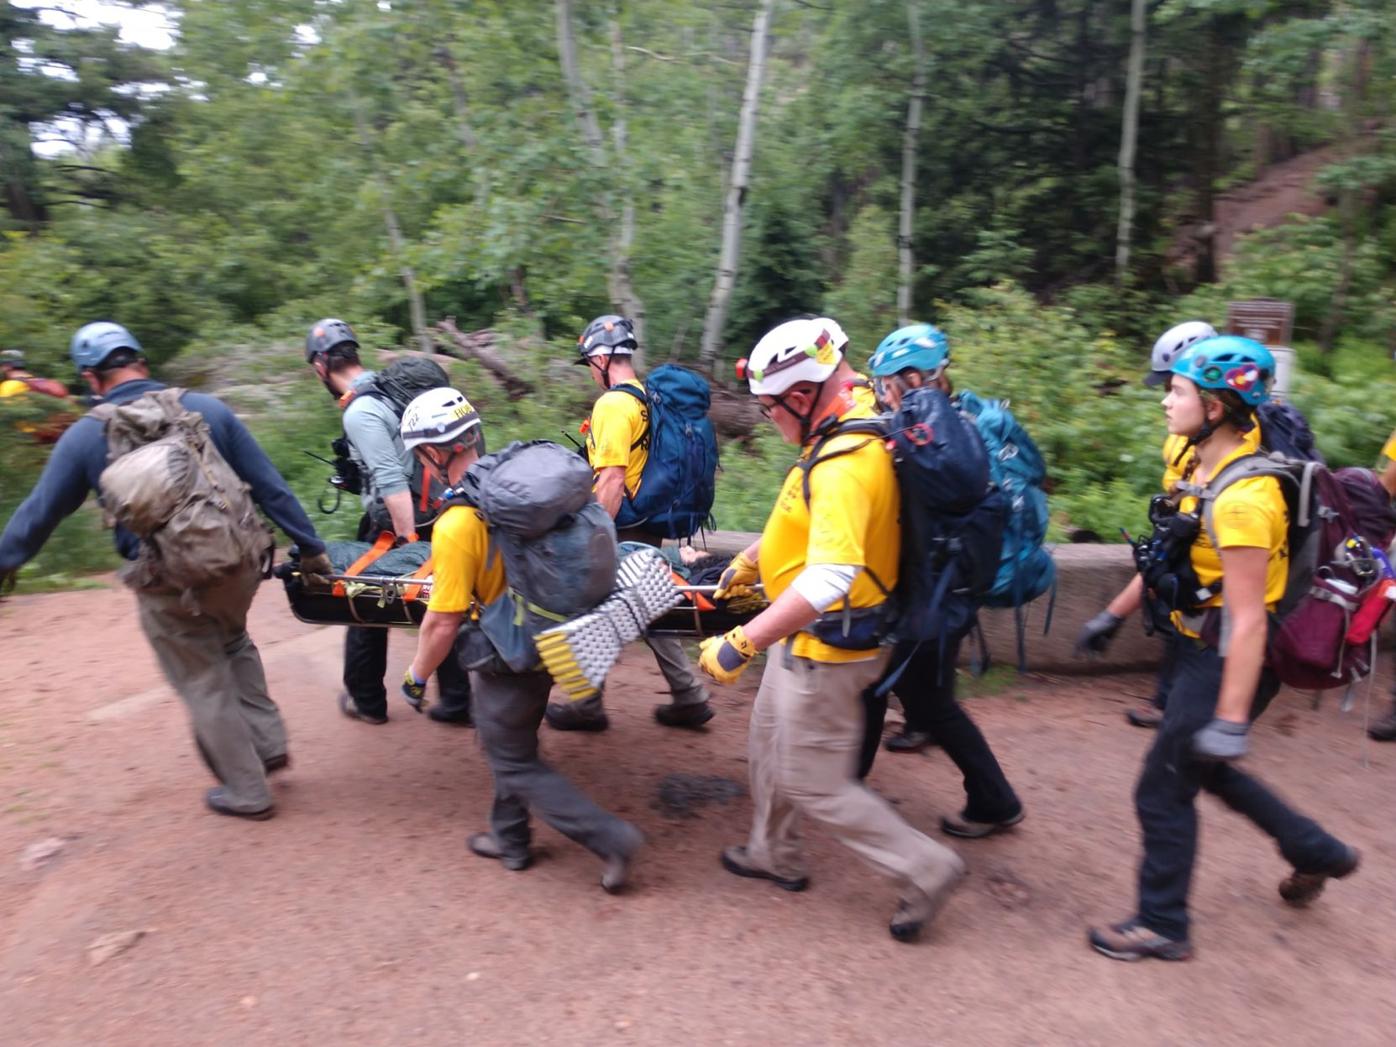 8 injured, 1 critically, after lightning hits near group of Devils Head  hikers | News 